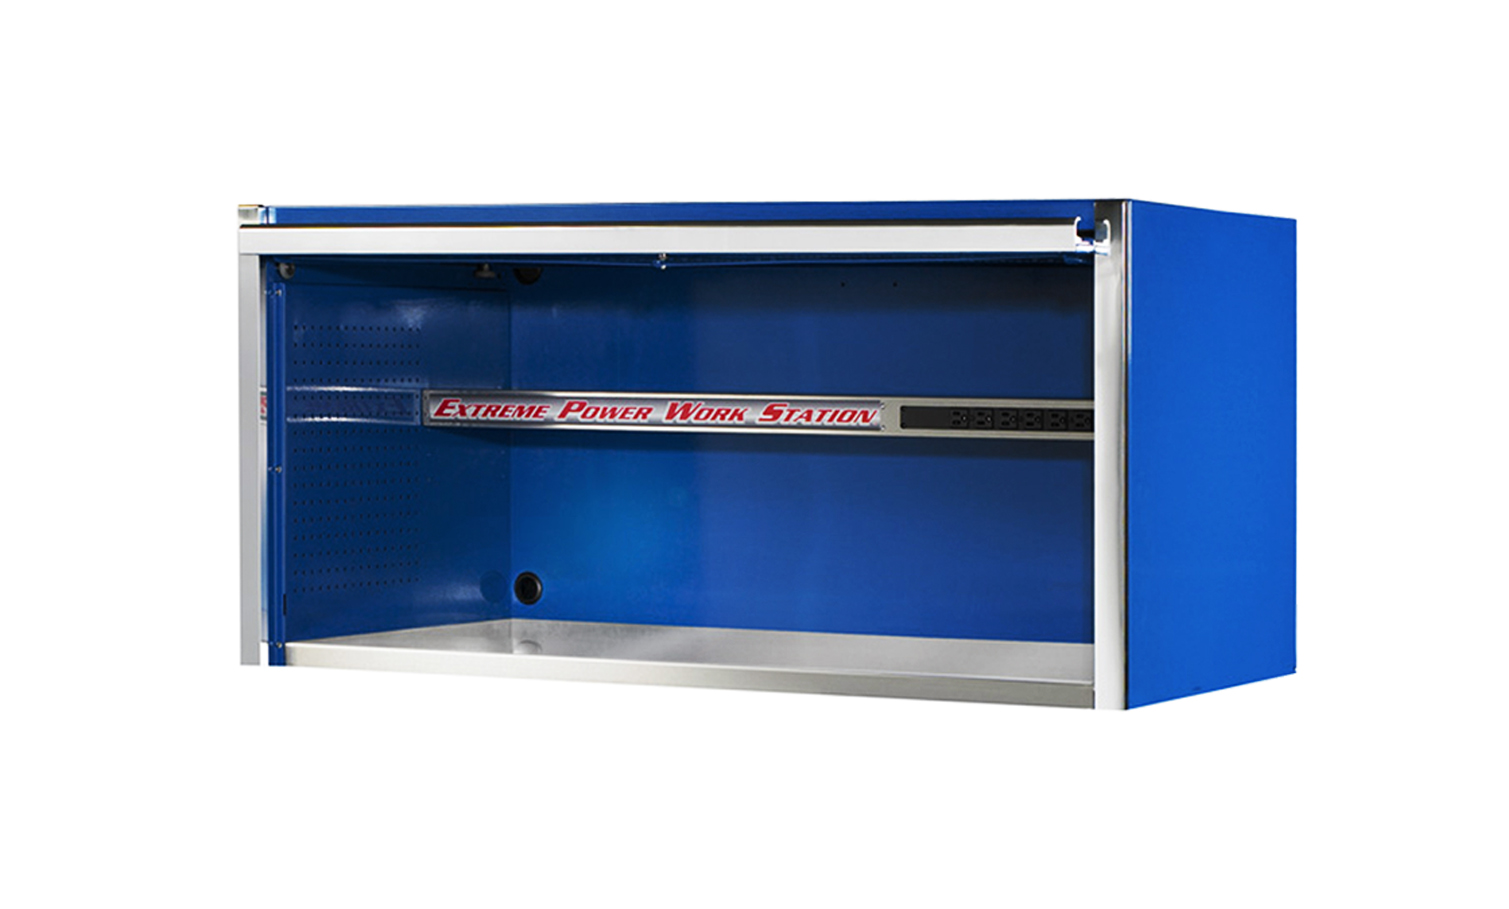 Extreme Tools® 55” Professional Power Workstation Hutch